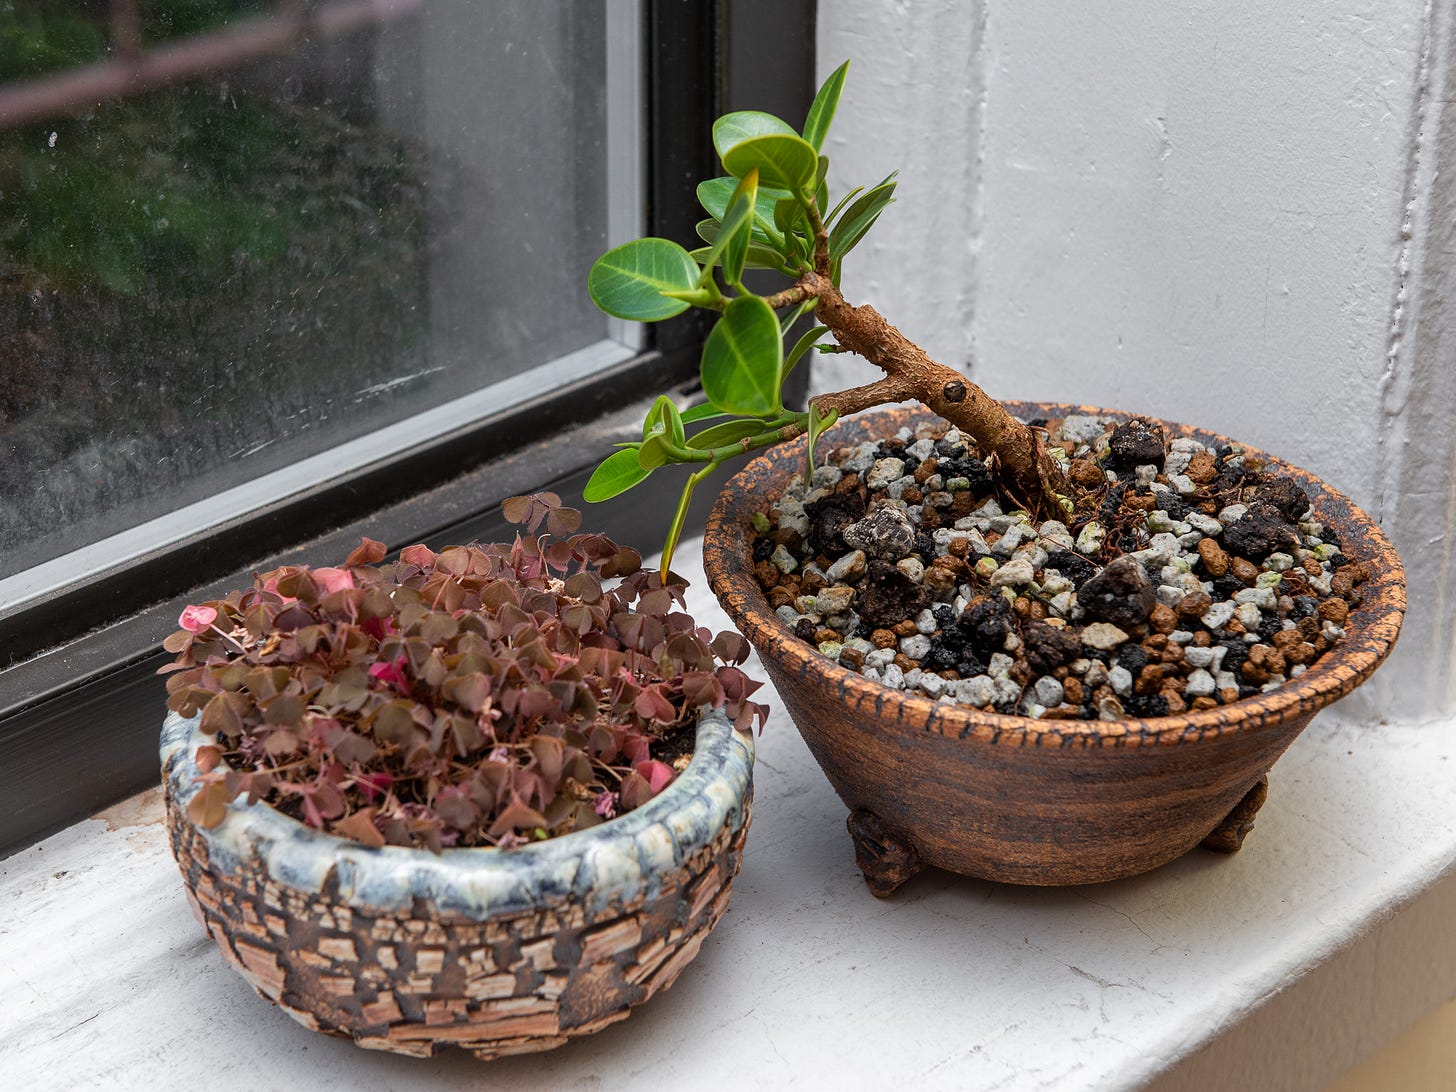 ID: Two small pots side by side. One has a small patch of oxalis and the other is the ficus.